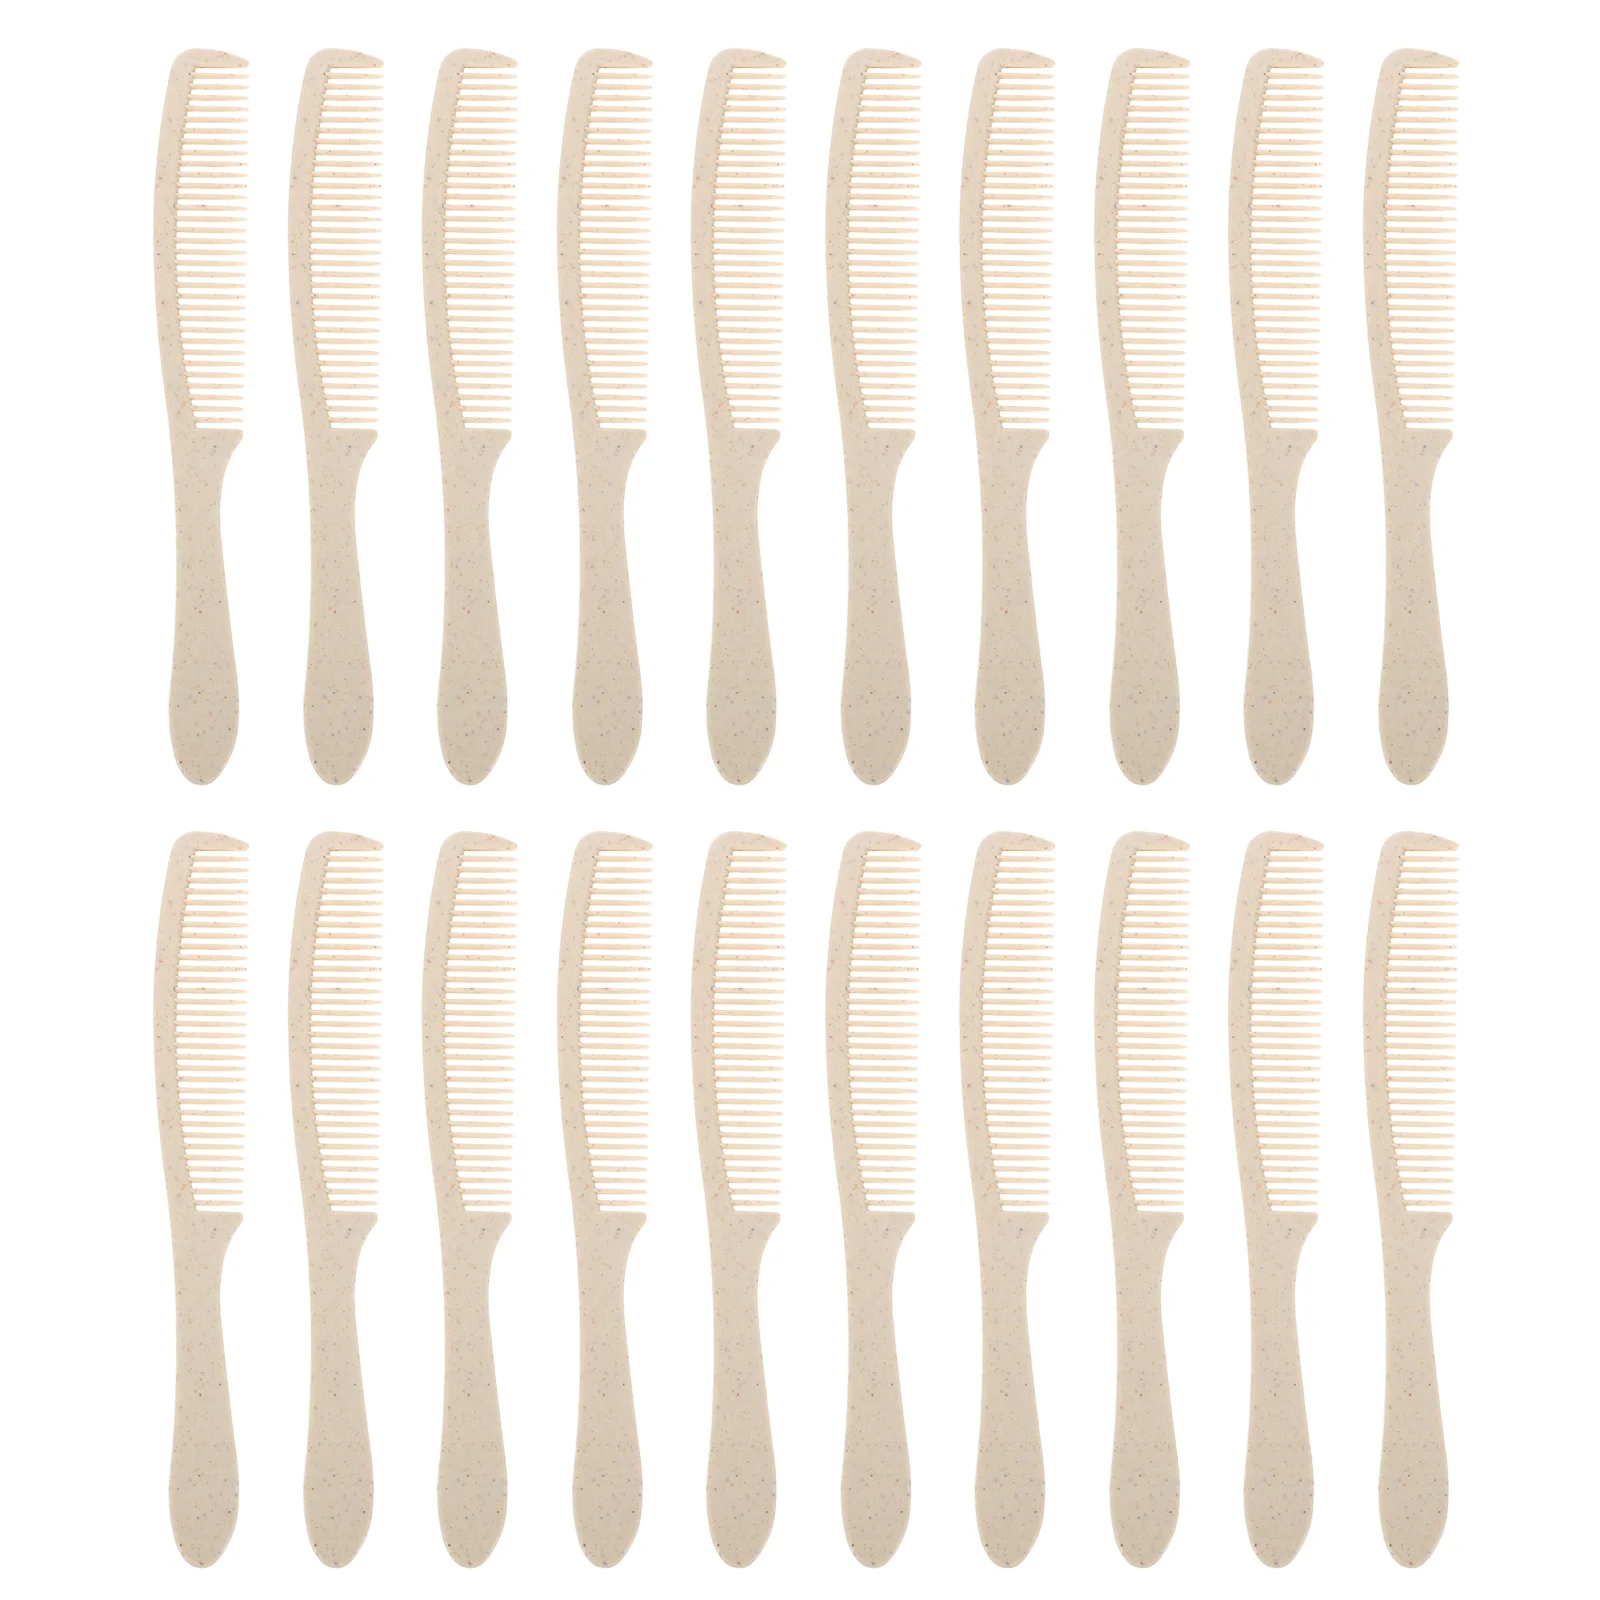 

50 Pack Combs Individually Wrapped, Disposable Comb Long Handle Comb Bulk Combs for Hotel Shelter Homeless Church Travel